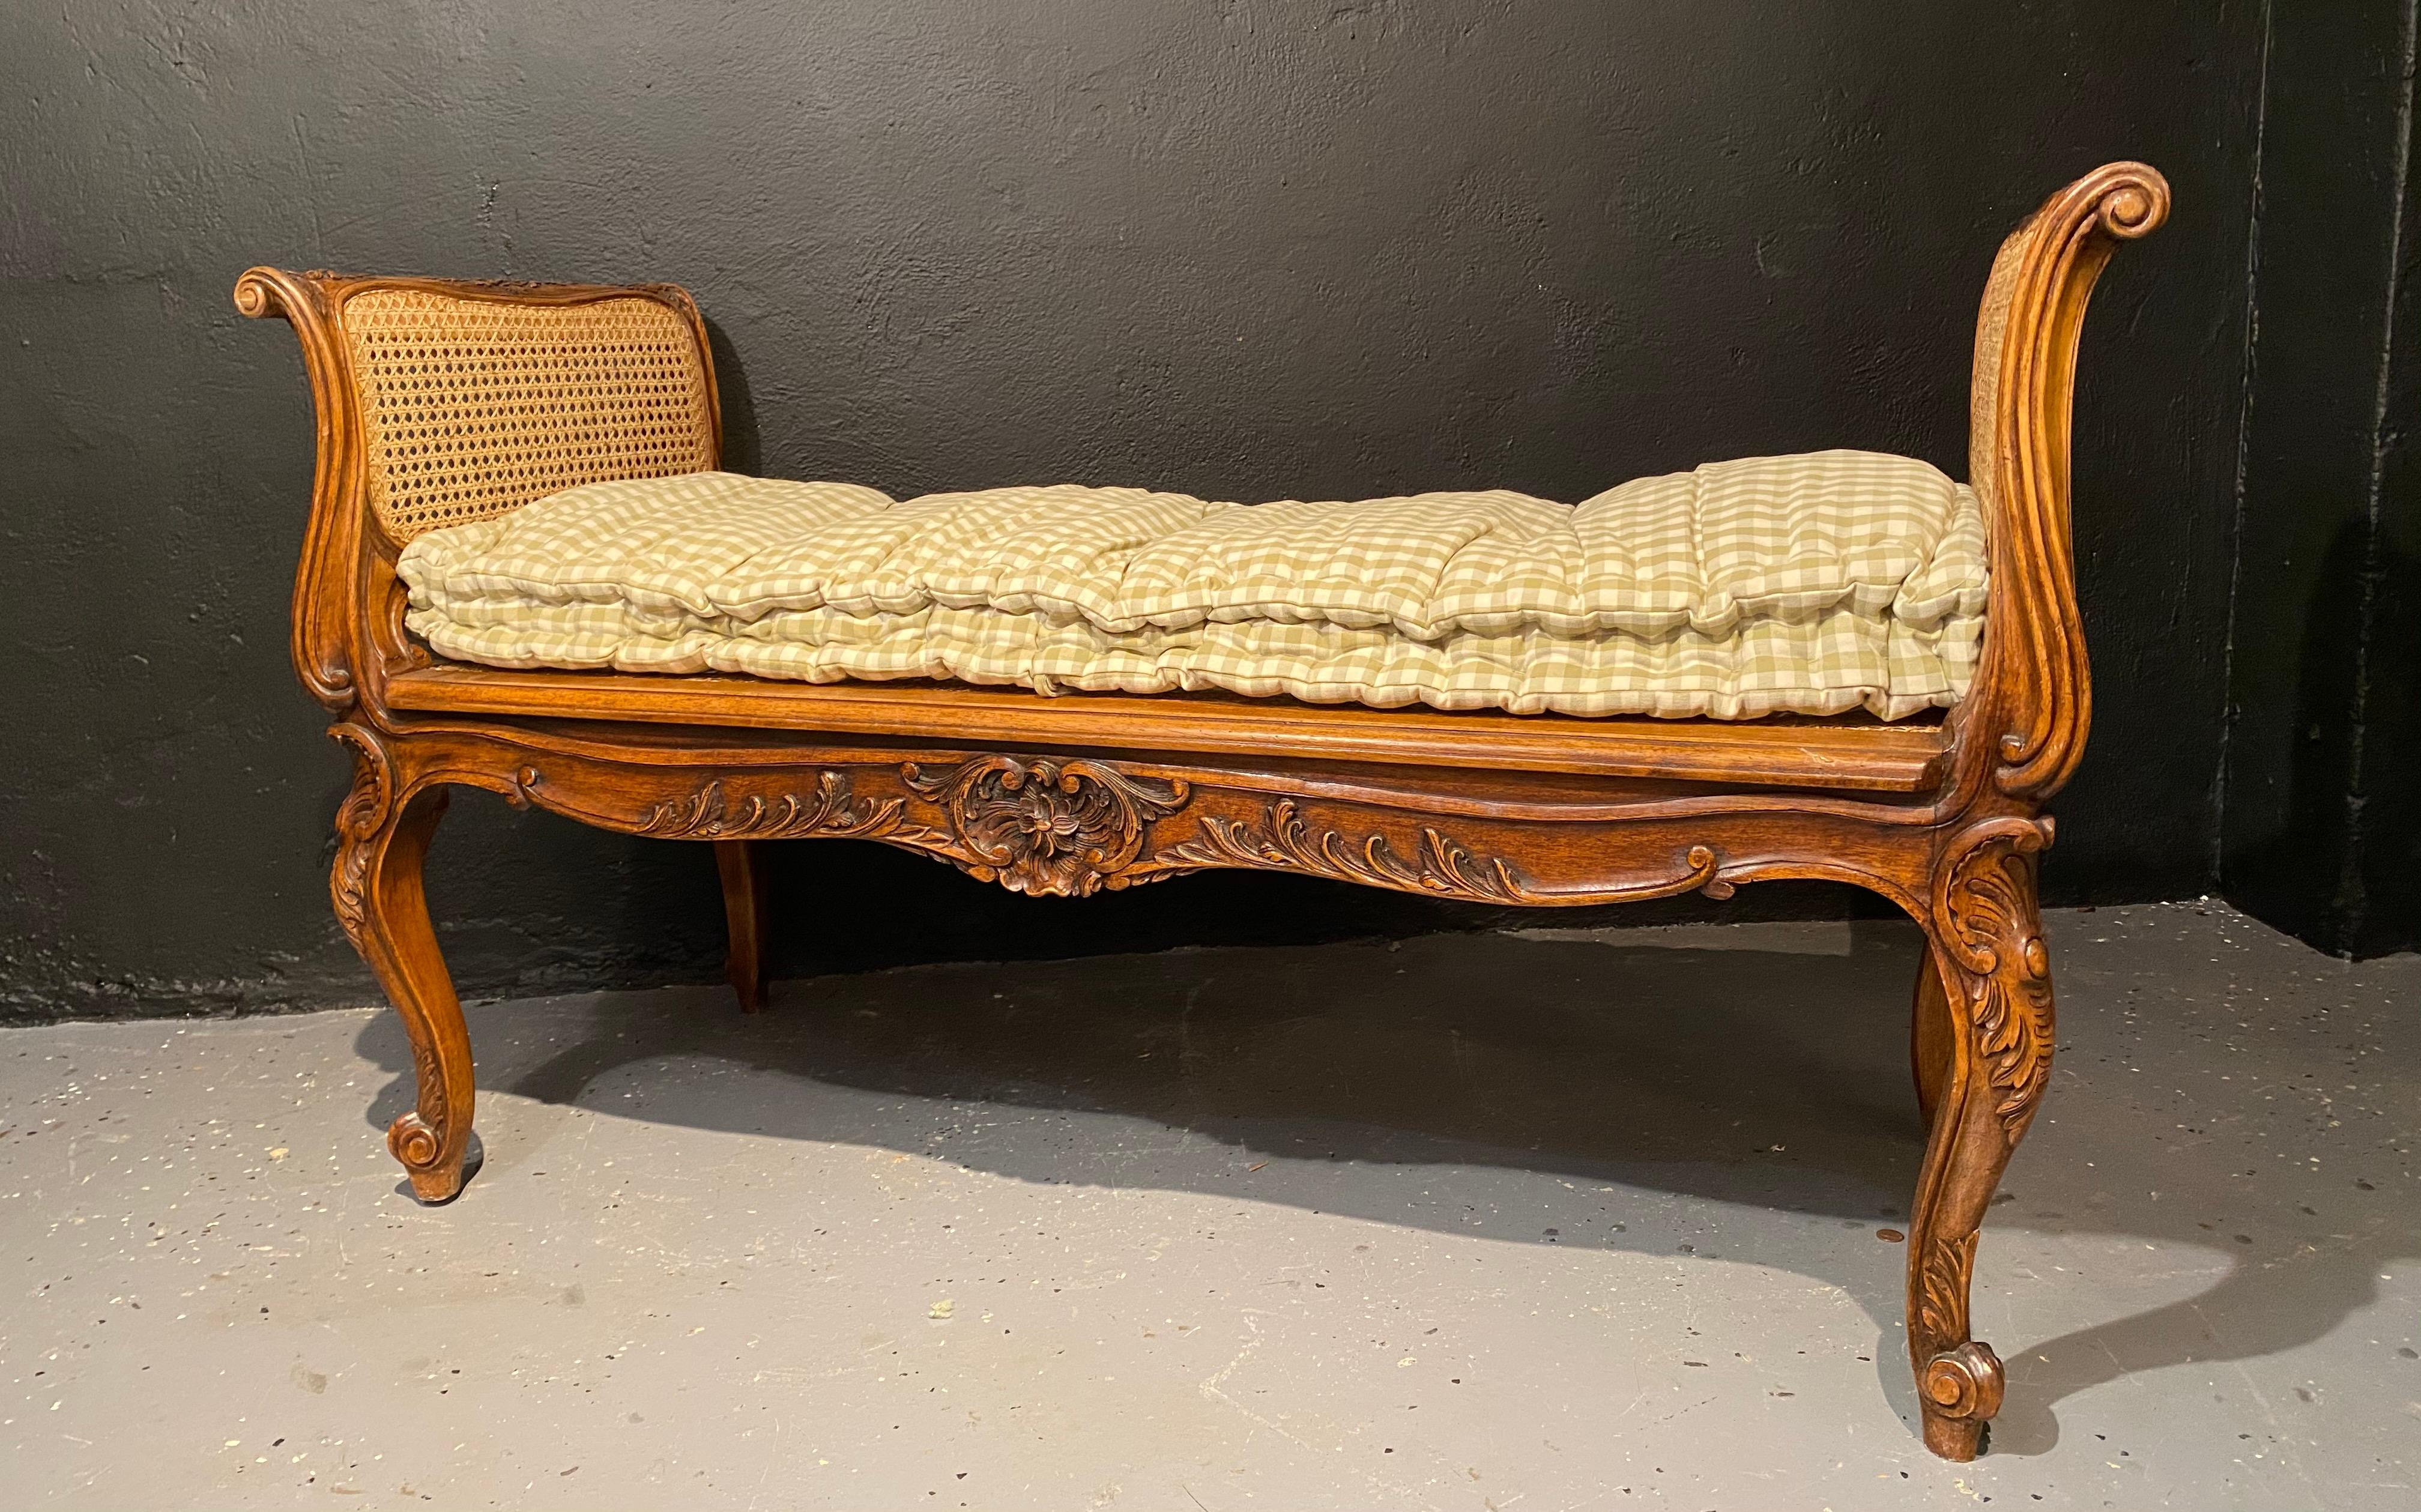 20th Century Louis XV Style Finely Carved Walnut Window Seat Bench